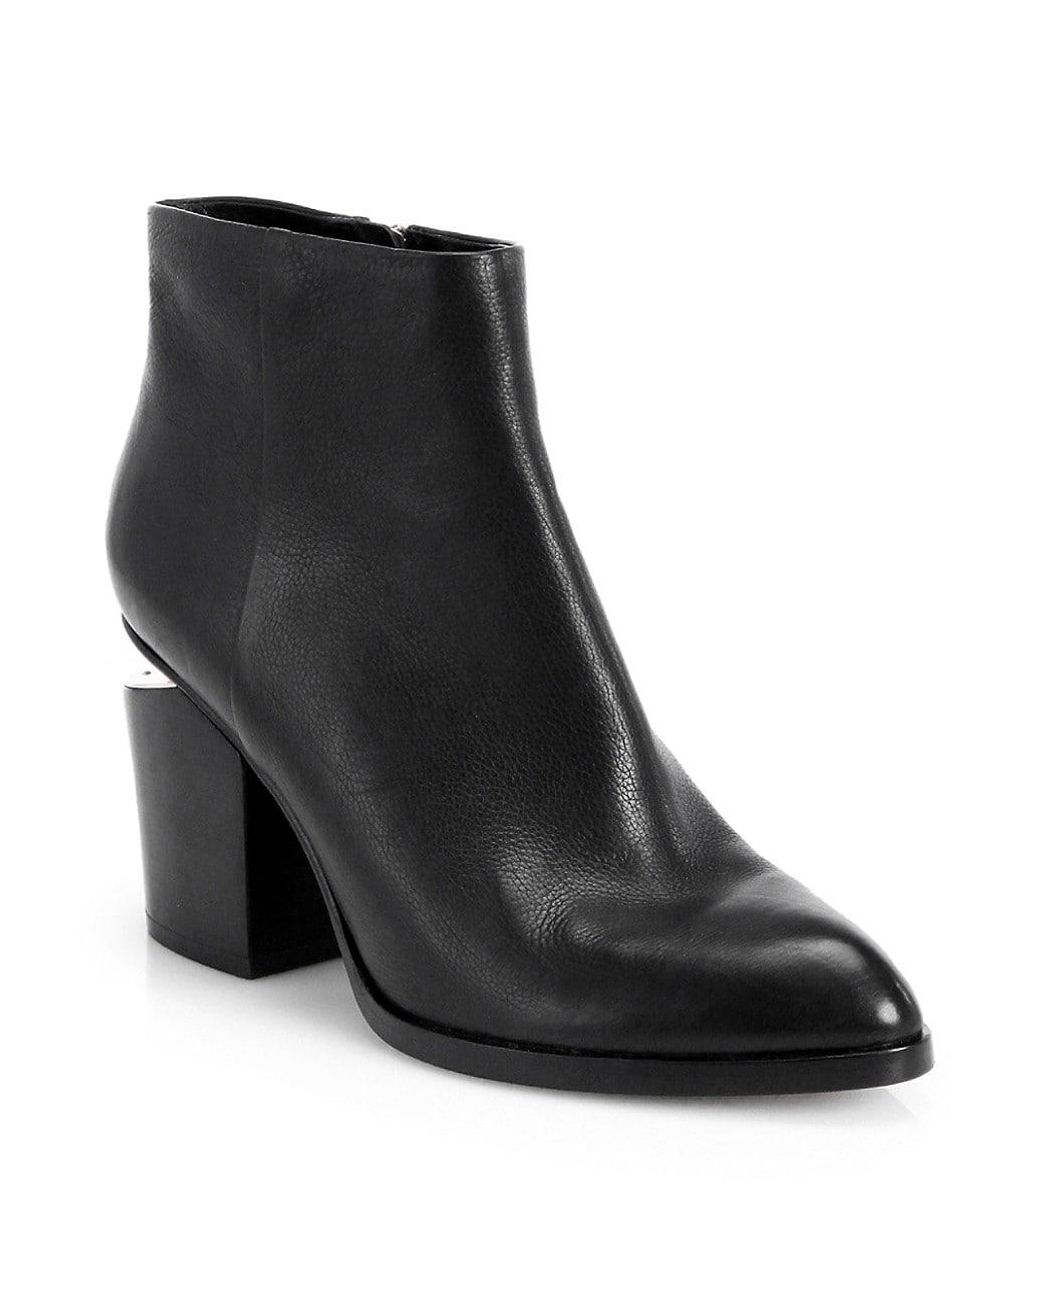 Alexander Wang Gabi Ankle Booties With Rose Gold Hardware in Black | Lyst